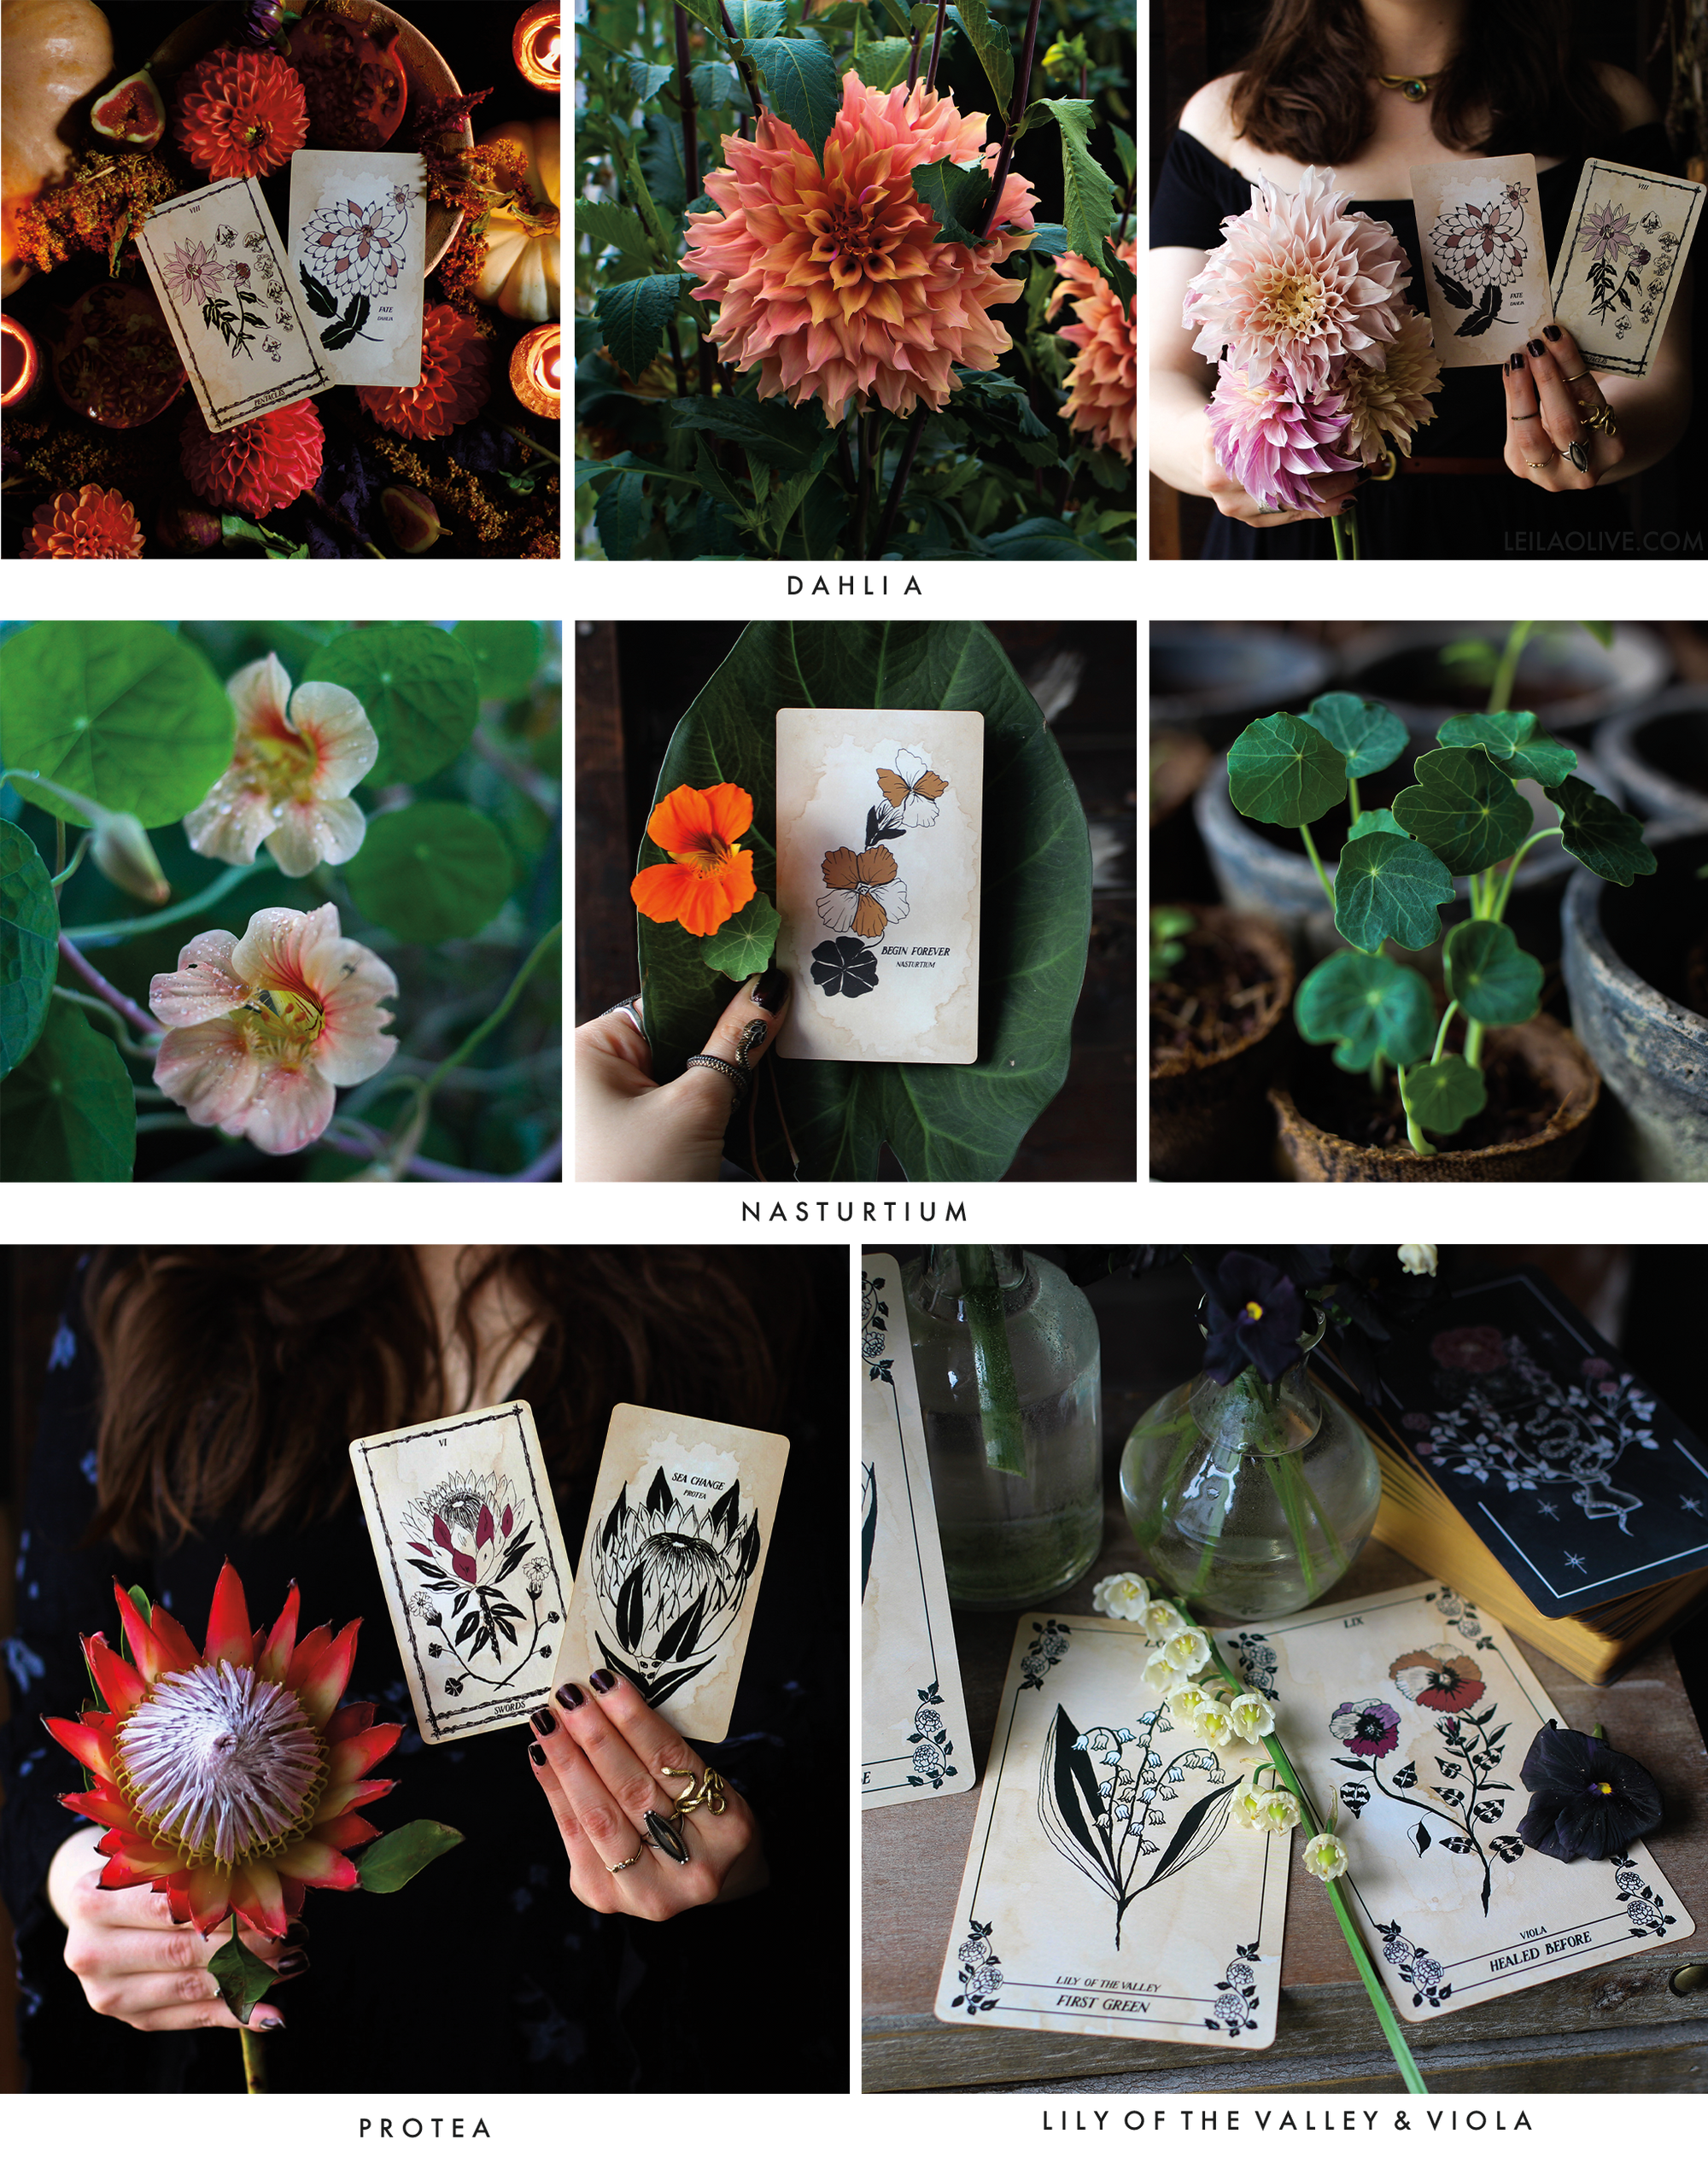 Botanical Oracle card deck reading with the flowers in the garden.